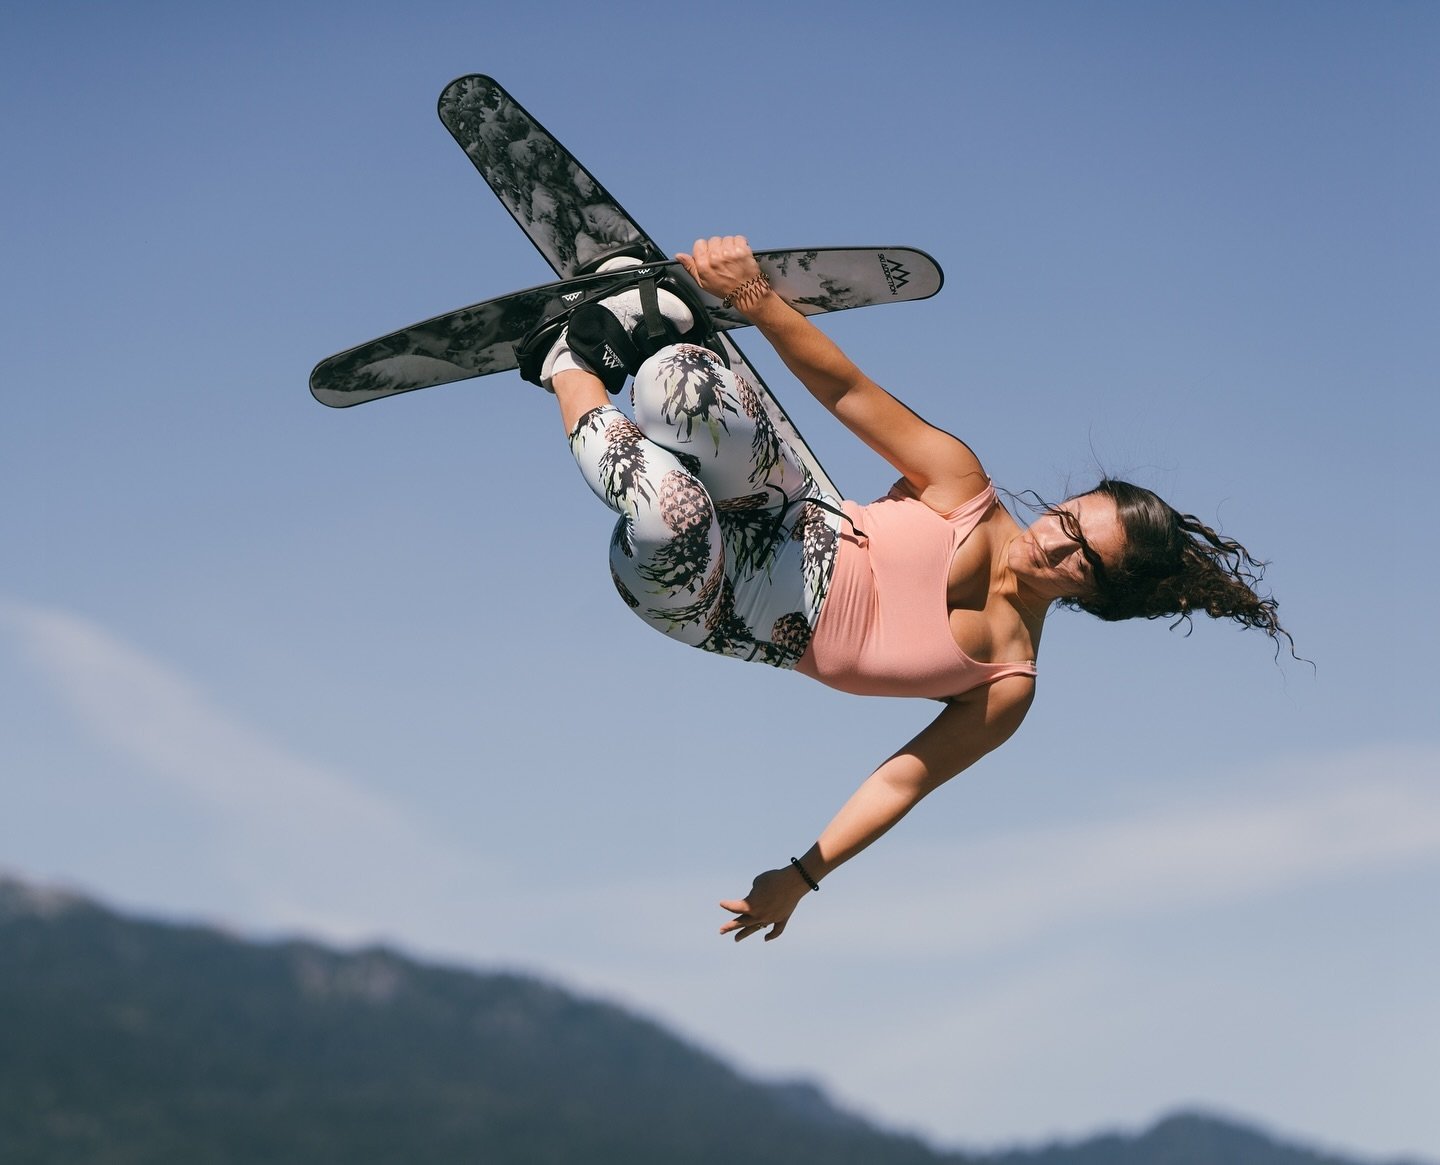 Freestyle Sports Training - High Performance program for spring 💙

Train here to take out there!
Whether you ski, snowboard, kiteboard, bike, dirt jump, surf, ice skate.. You need to be able to control your body whilst hurtling through the air, and 